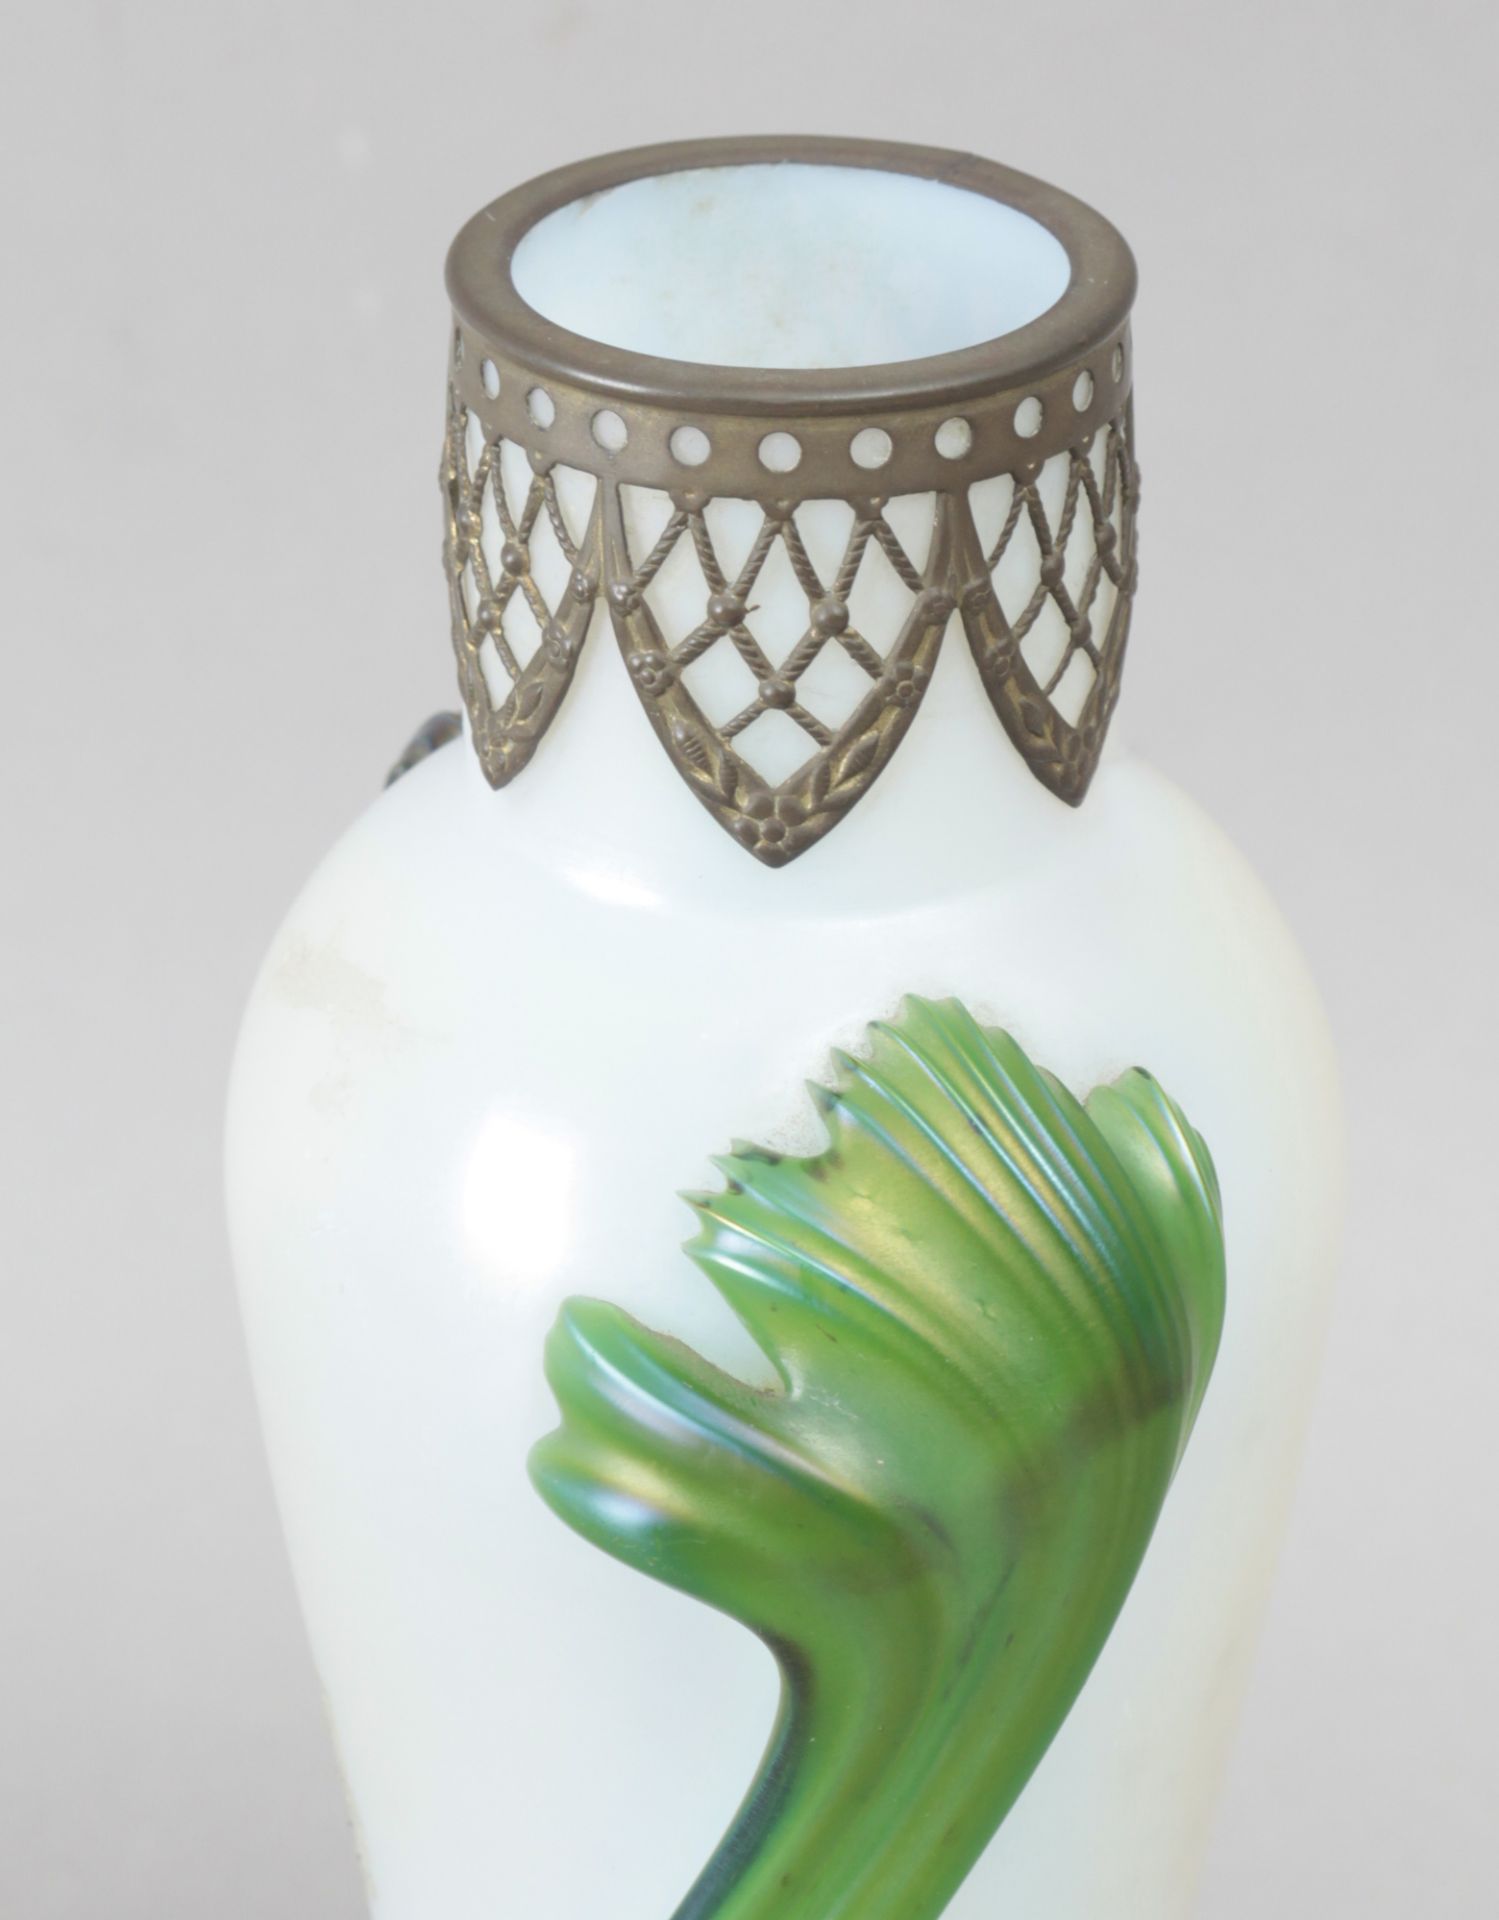 An early 20th century Art Nouveau vase in Loetz glass - Image 2 of 3